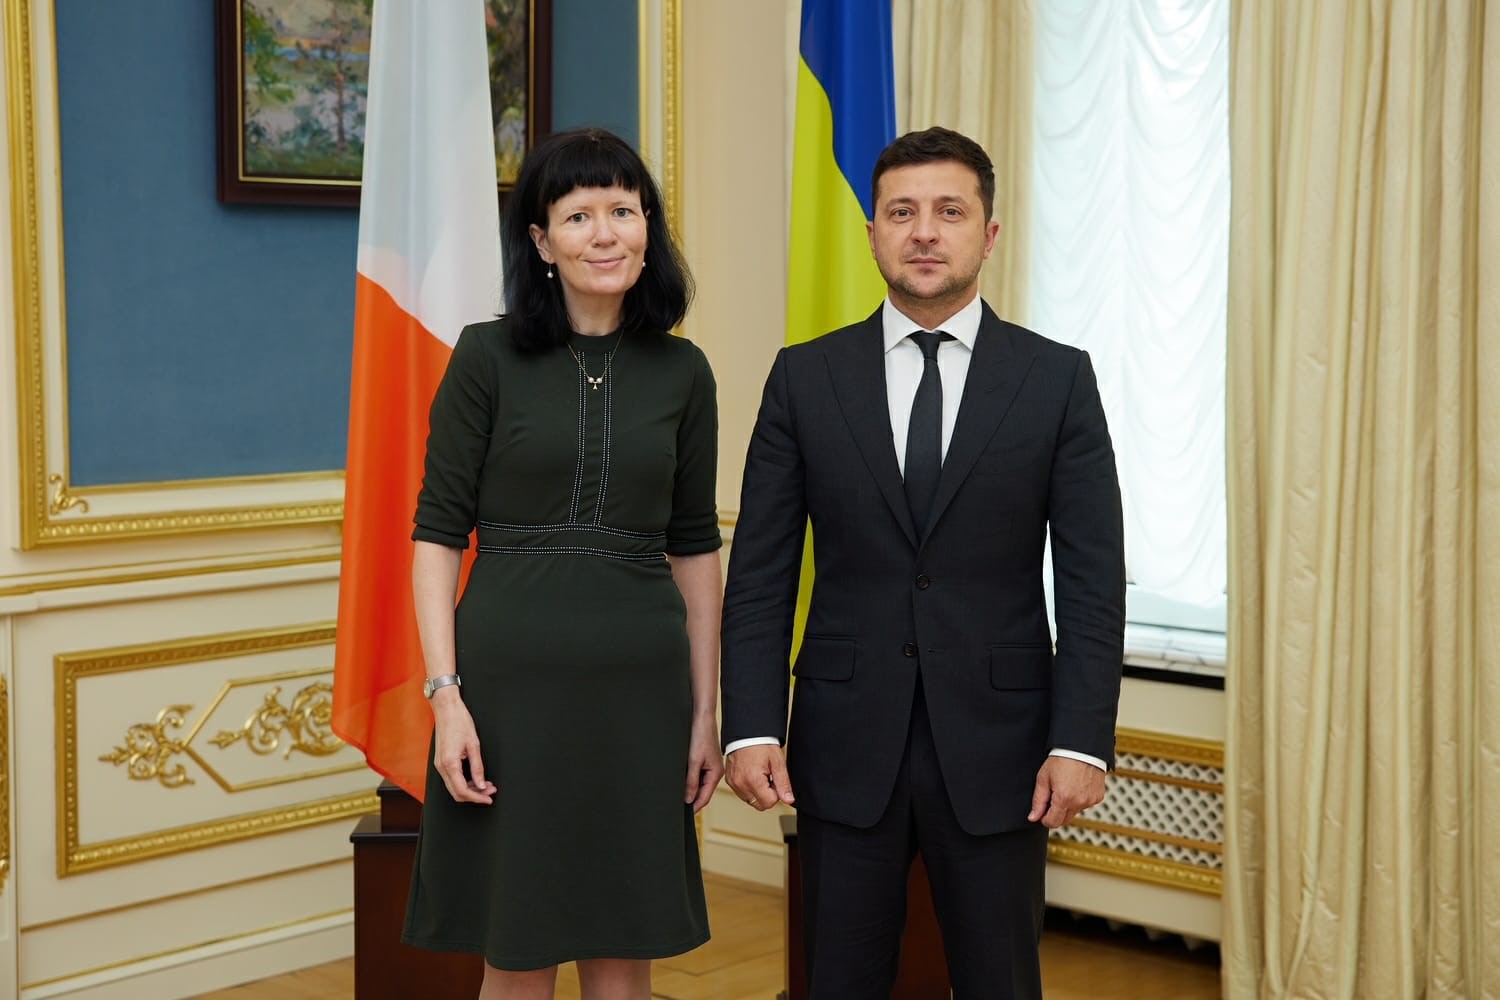 Ireland's first resident Ambassador to Ukraine, Therese Healy, with Ukrainian President, Volodymyr Zelenskyy at the Presidential Administration in Kyiv.